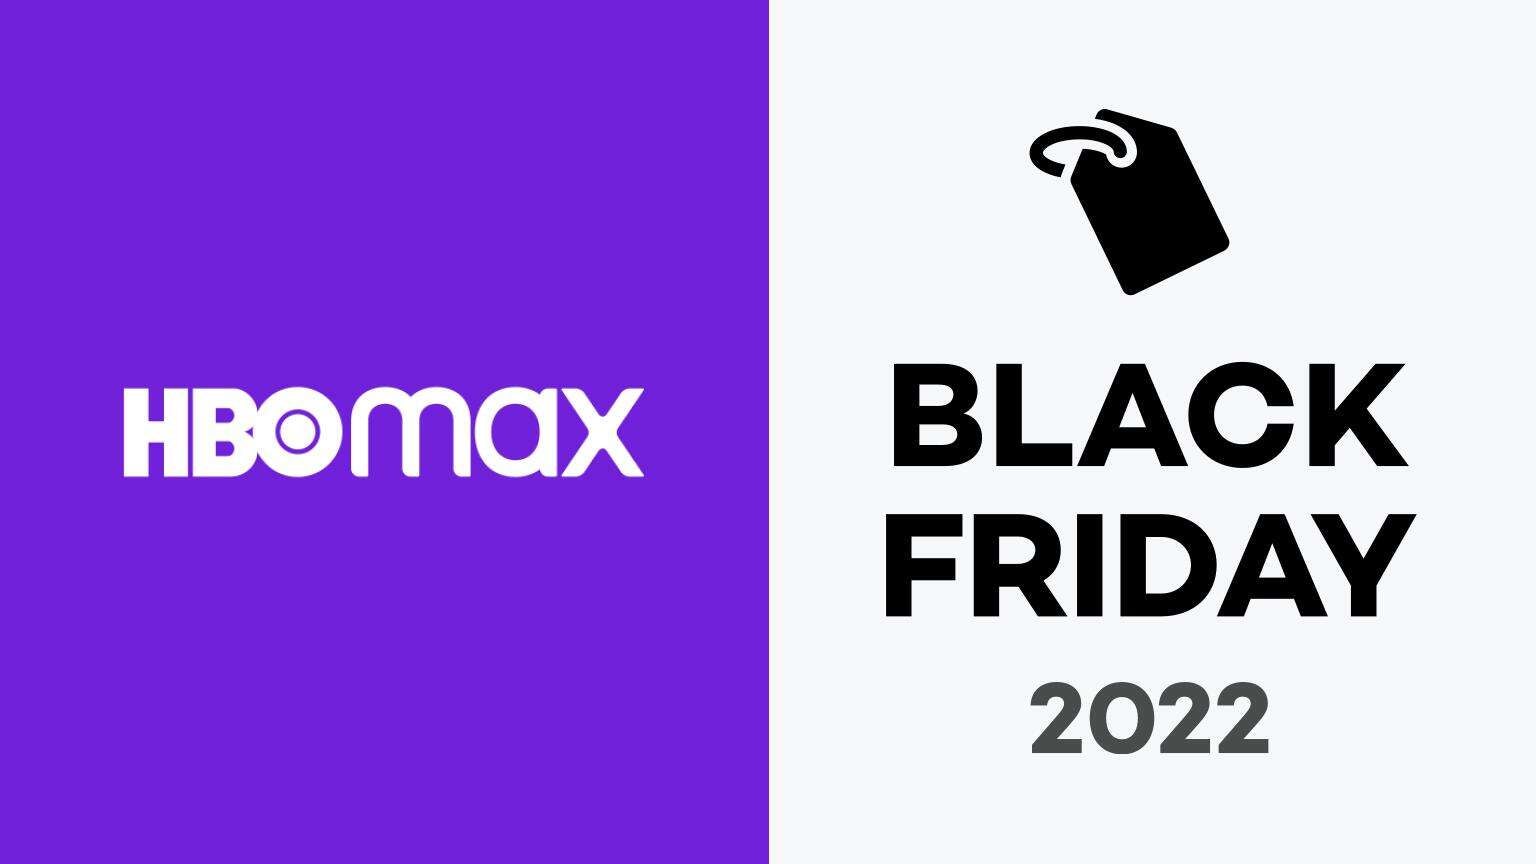 HBO Max Black Friday 2022 Deals What Are the Best Ways to Save? The